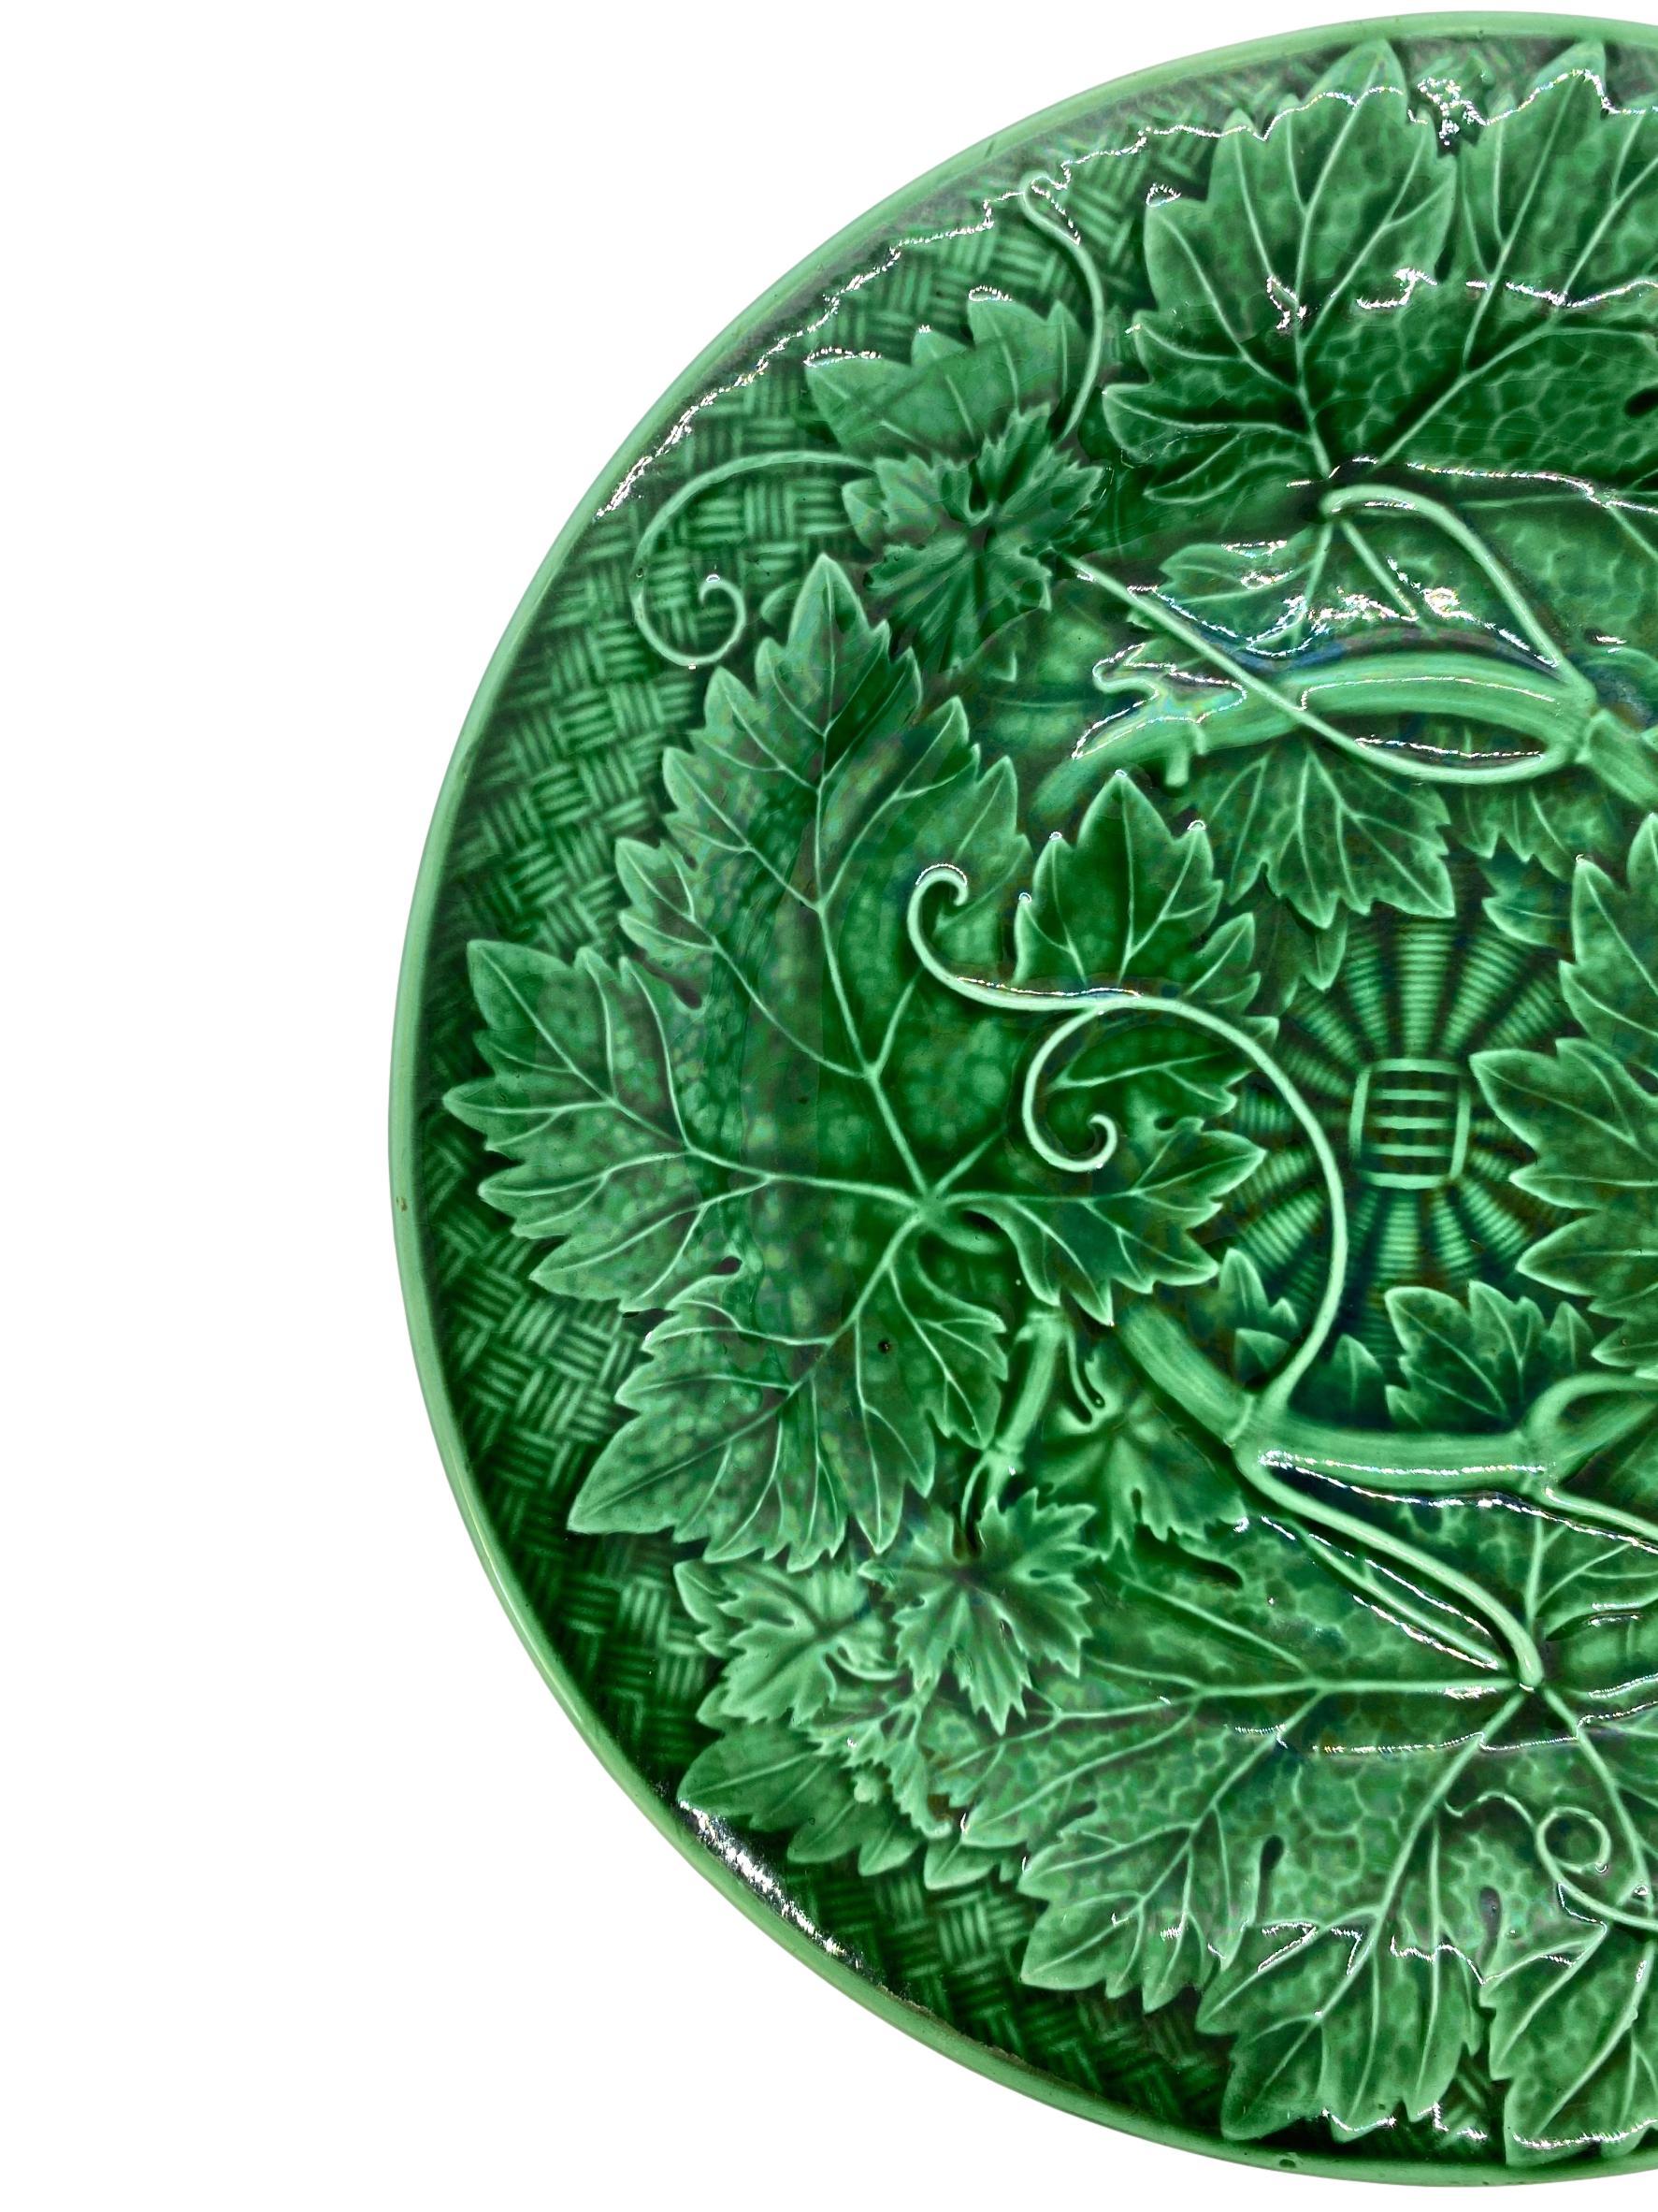 Wedgwood Majolica green glazed plate, with relief-molded grape leaves and vines, raised on a basketweave ground, the reverse with impressed mark 'WEDGWOOD' and date letter 'W' for 1894.

For 30 years we have been among the world's preeminent